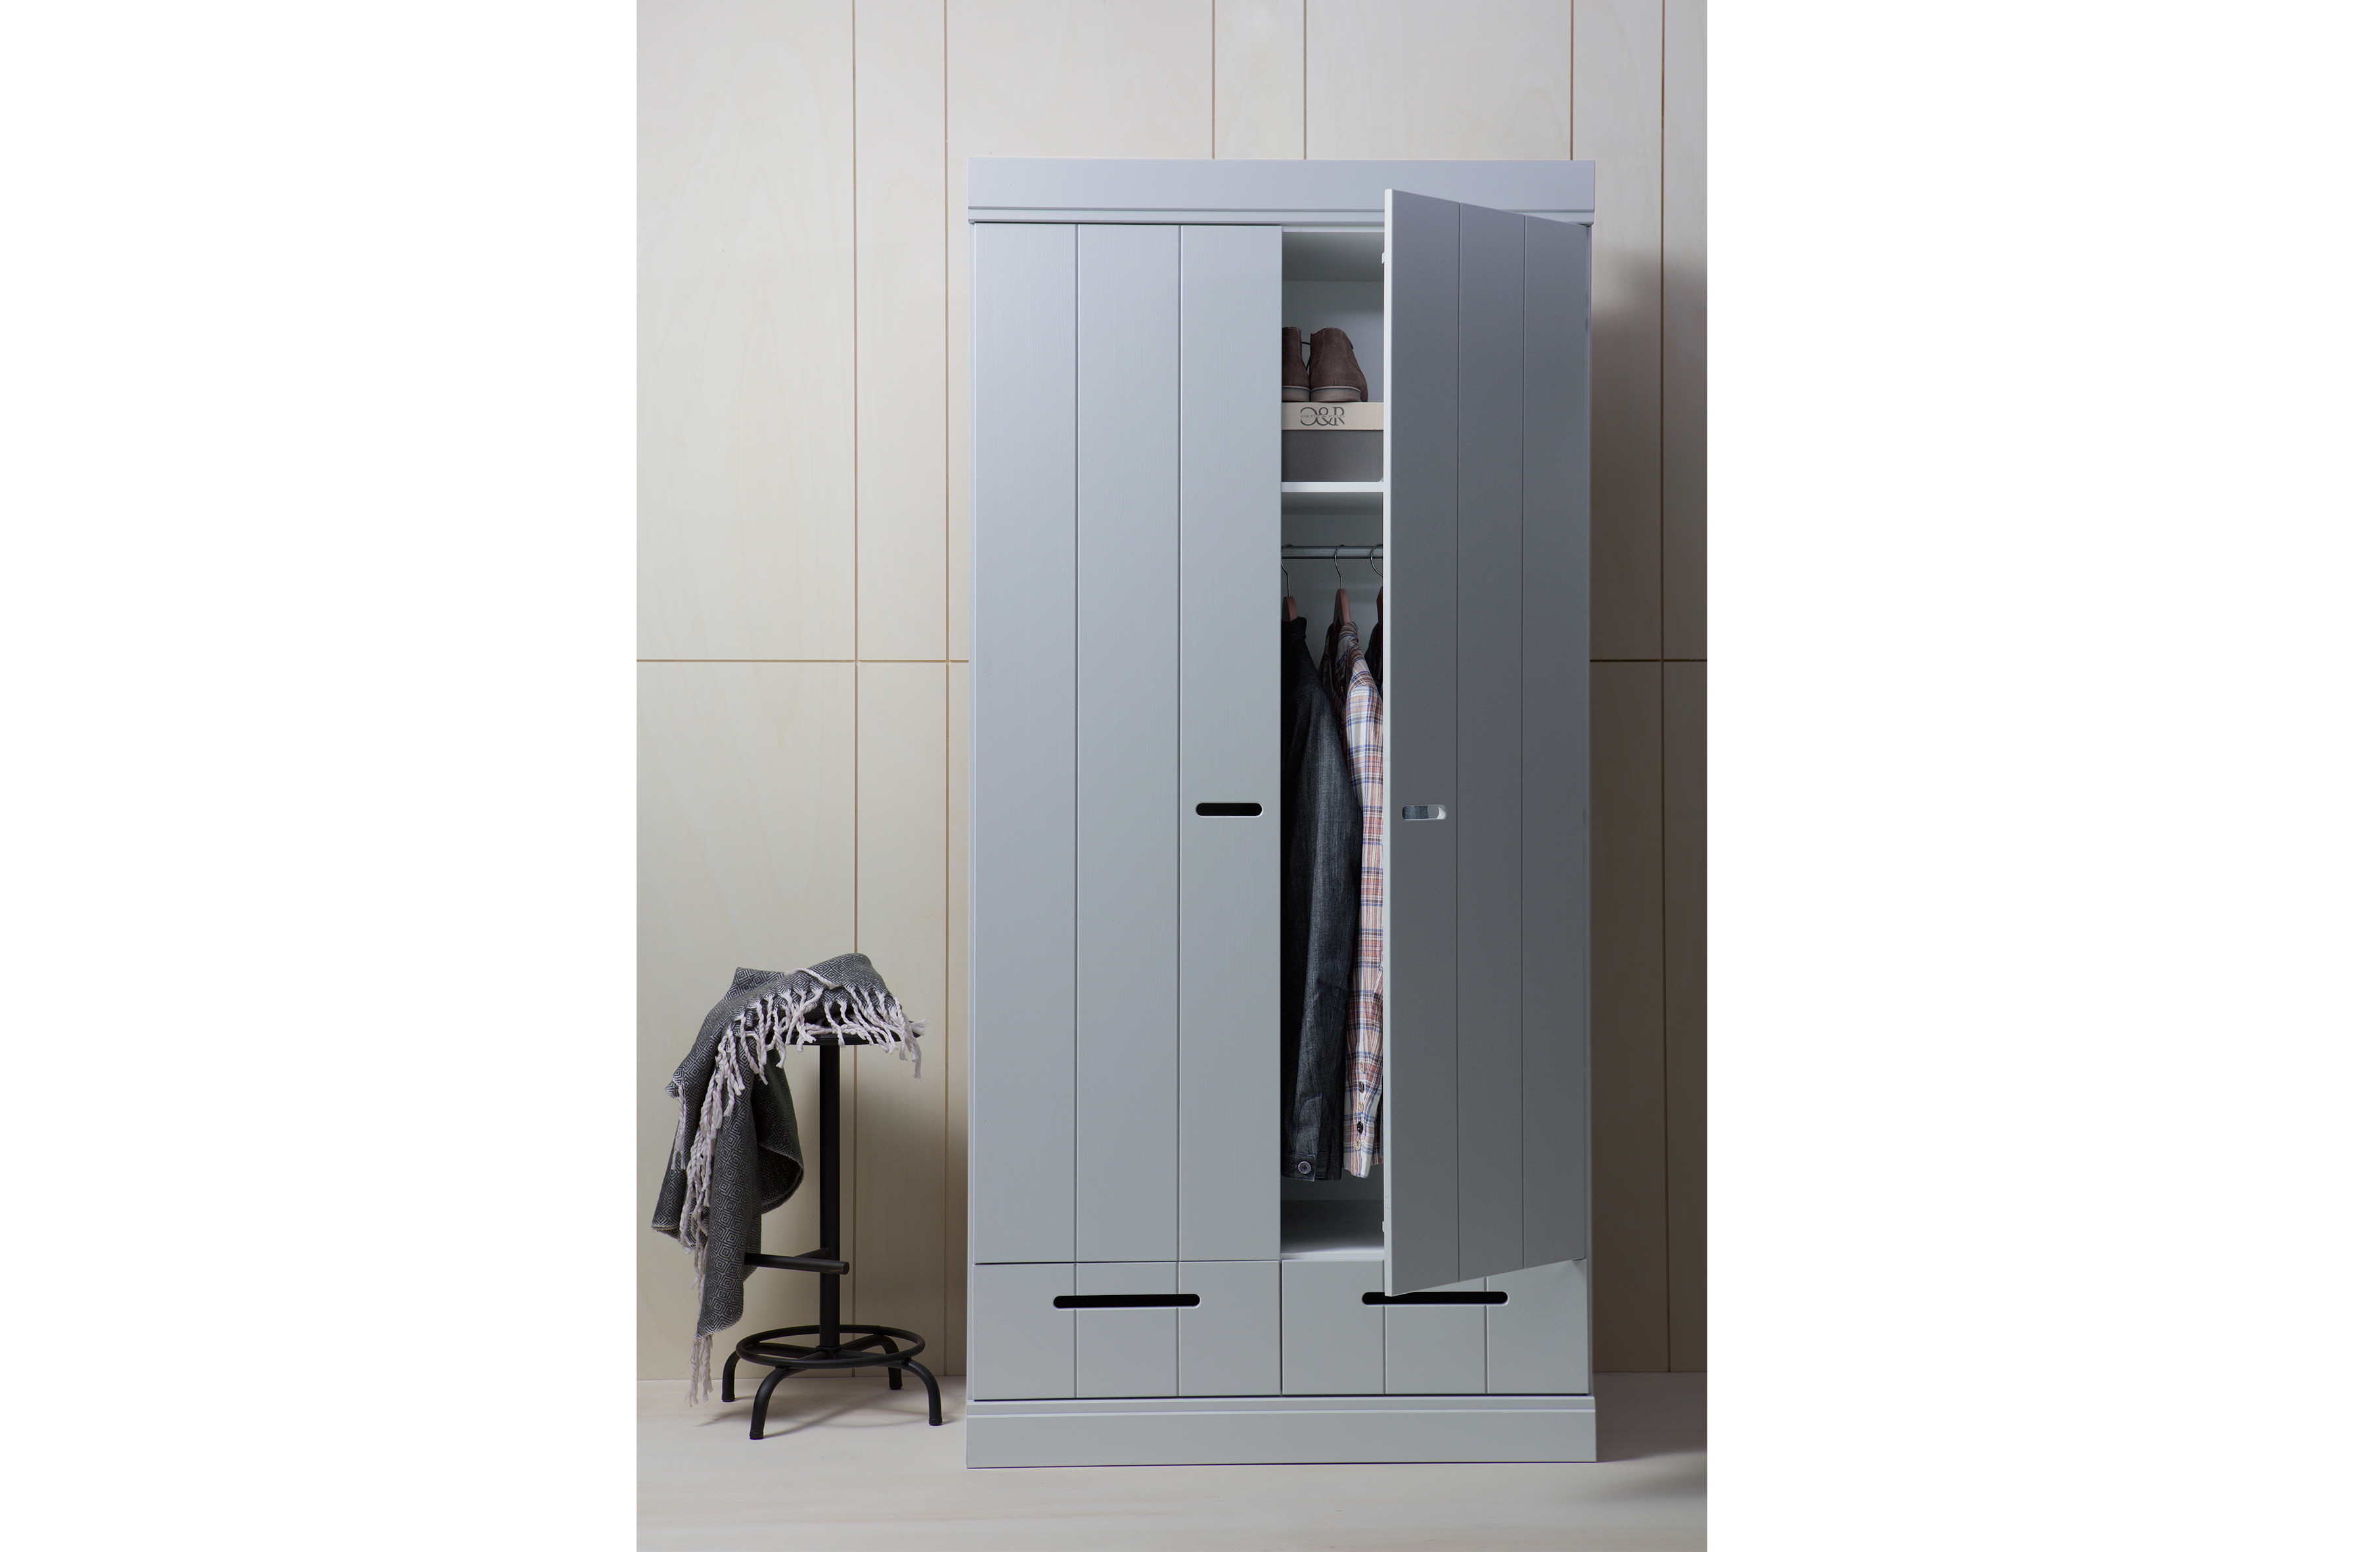 Rent a Closet Connect 2drs drawers concrete grey? Rent at KeyPro furniture rental!